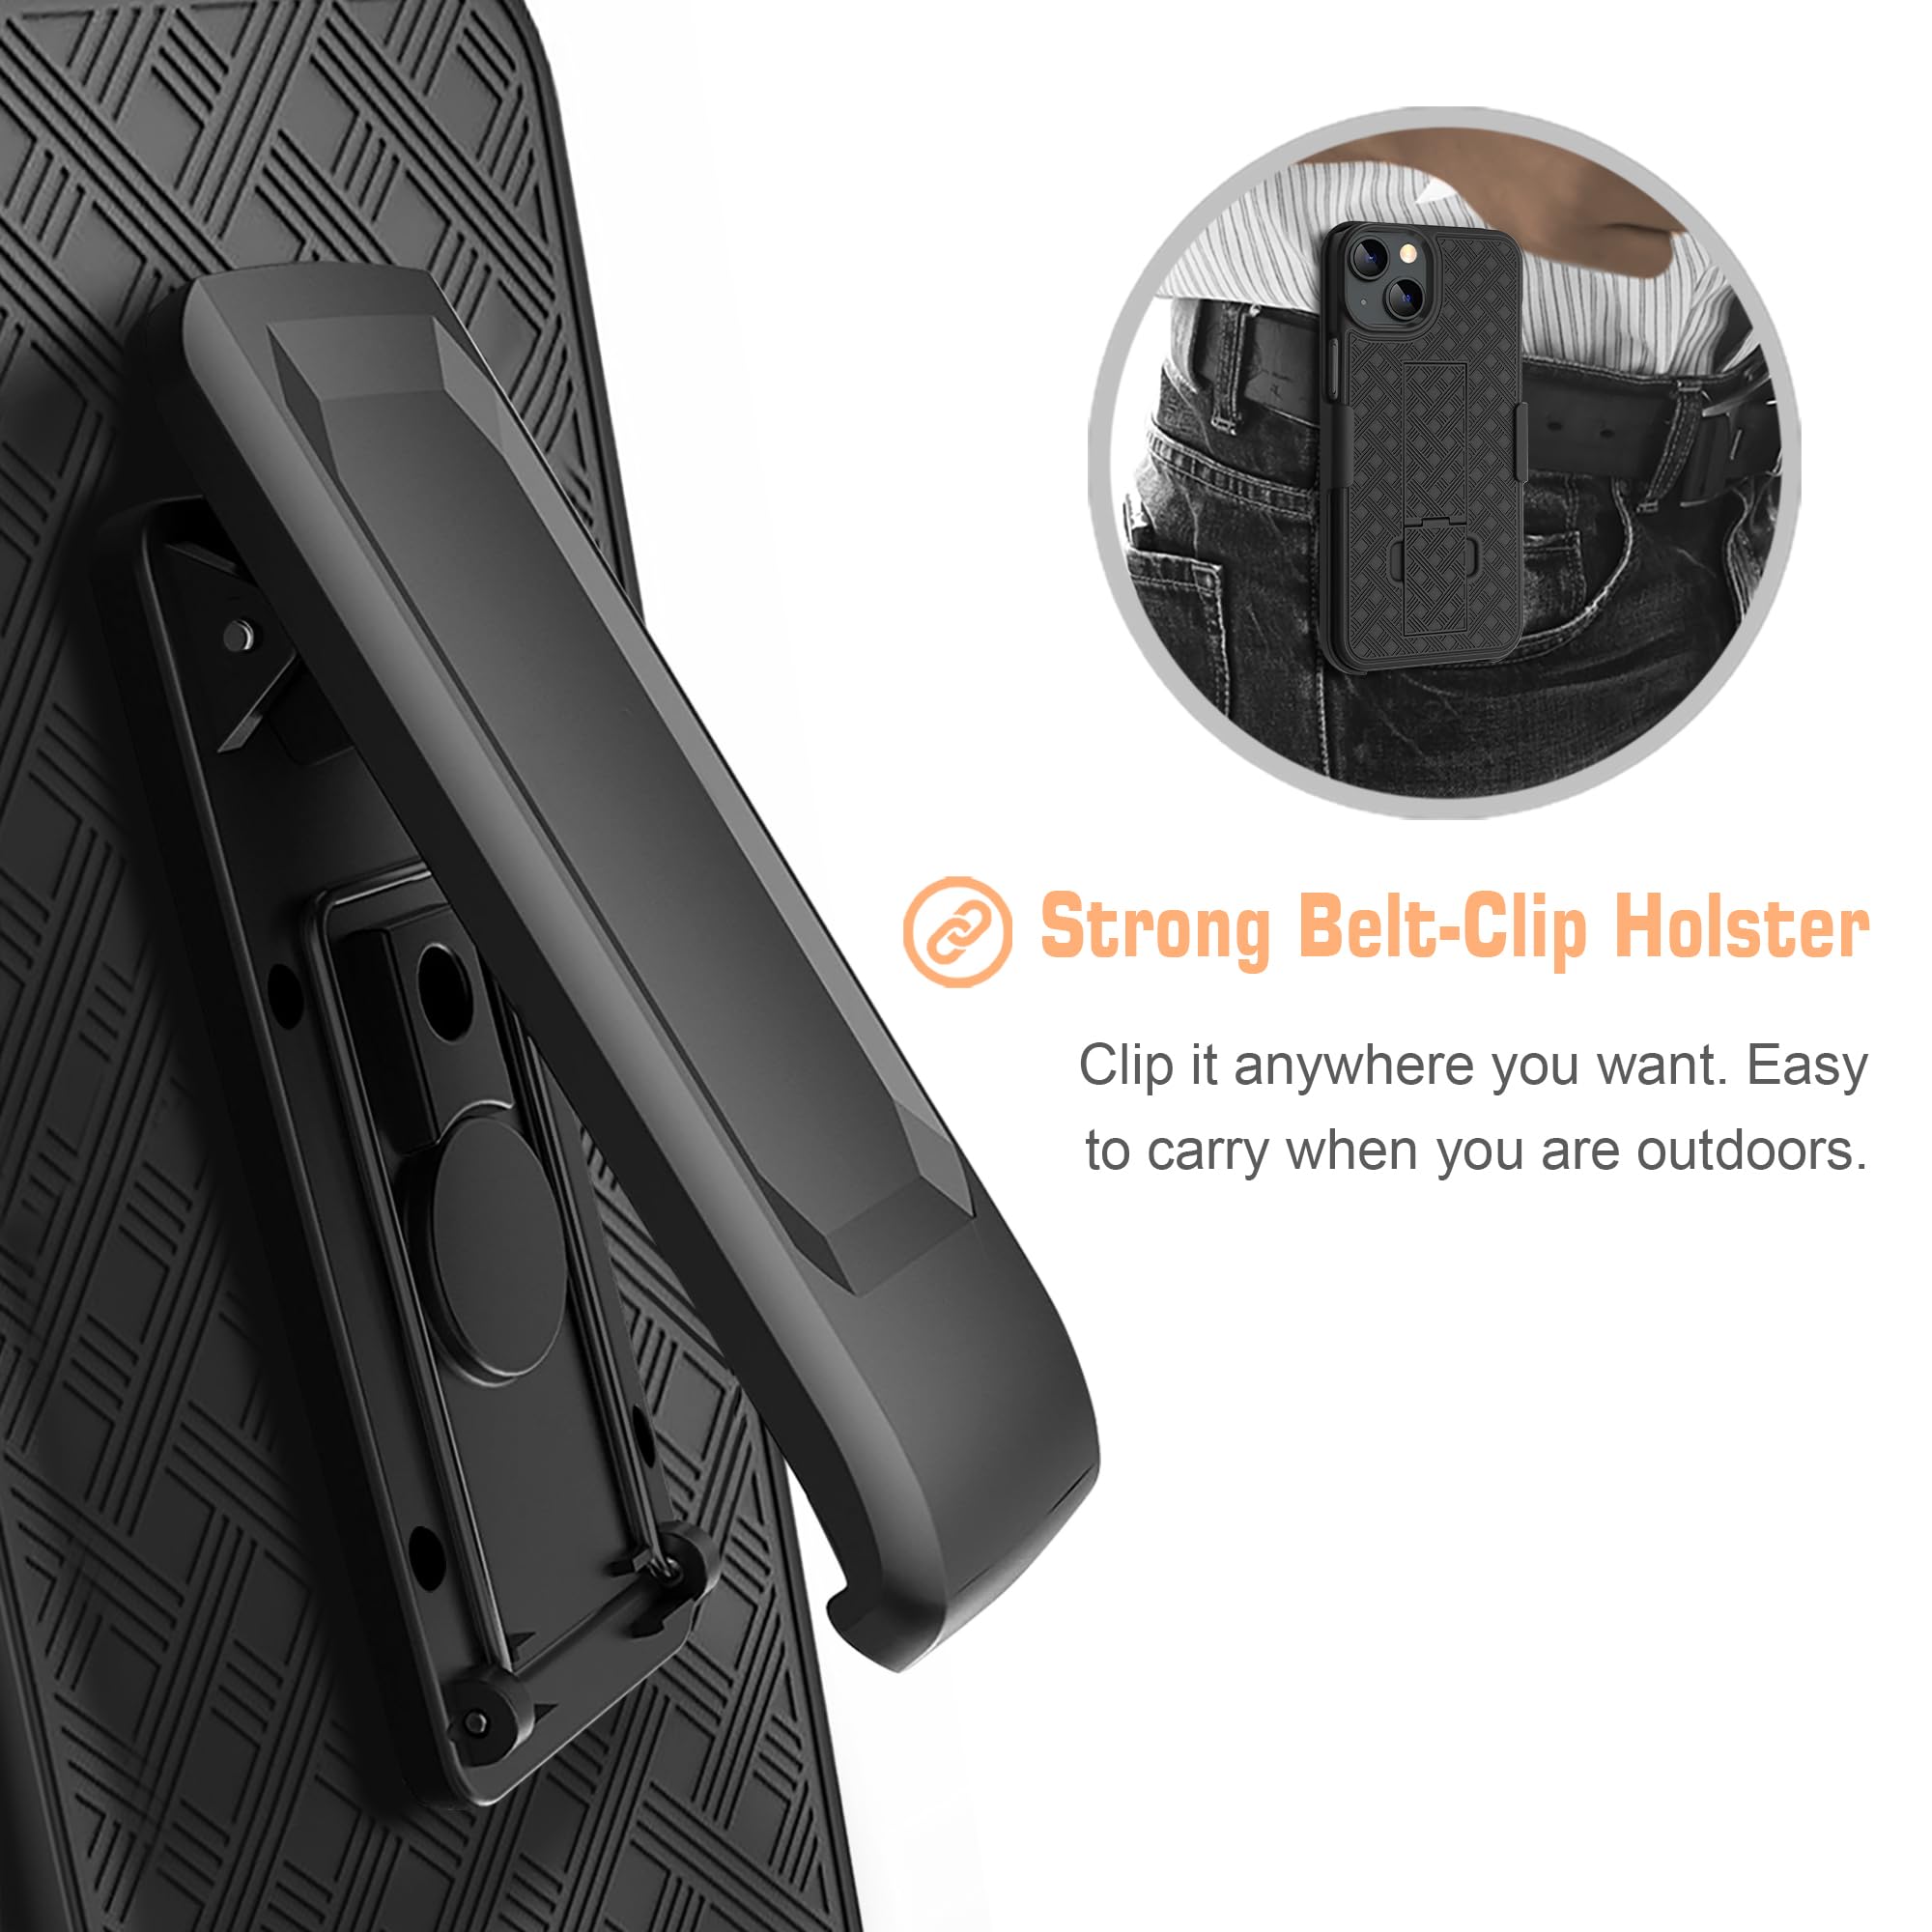 Fingic Case for iPhone 15 Case,iPhone 15 Belt Clip Holster Case Slim Combo Shell with Kickstand Swivel Belt Clip Holster Rugged Shockproof Antiscratch Protective Cover for iPhone 15 5G 6.1 inch(Black)